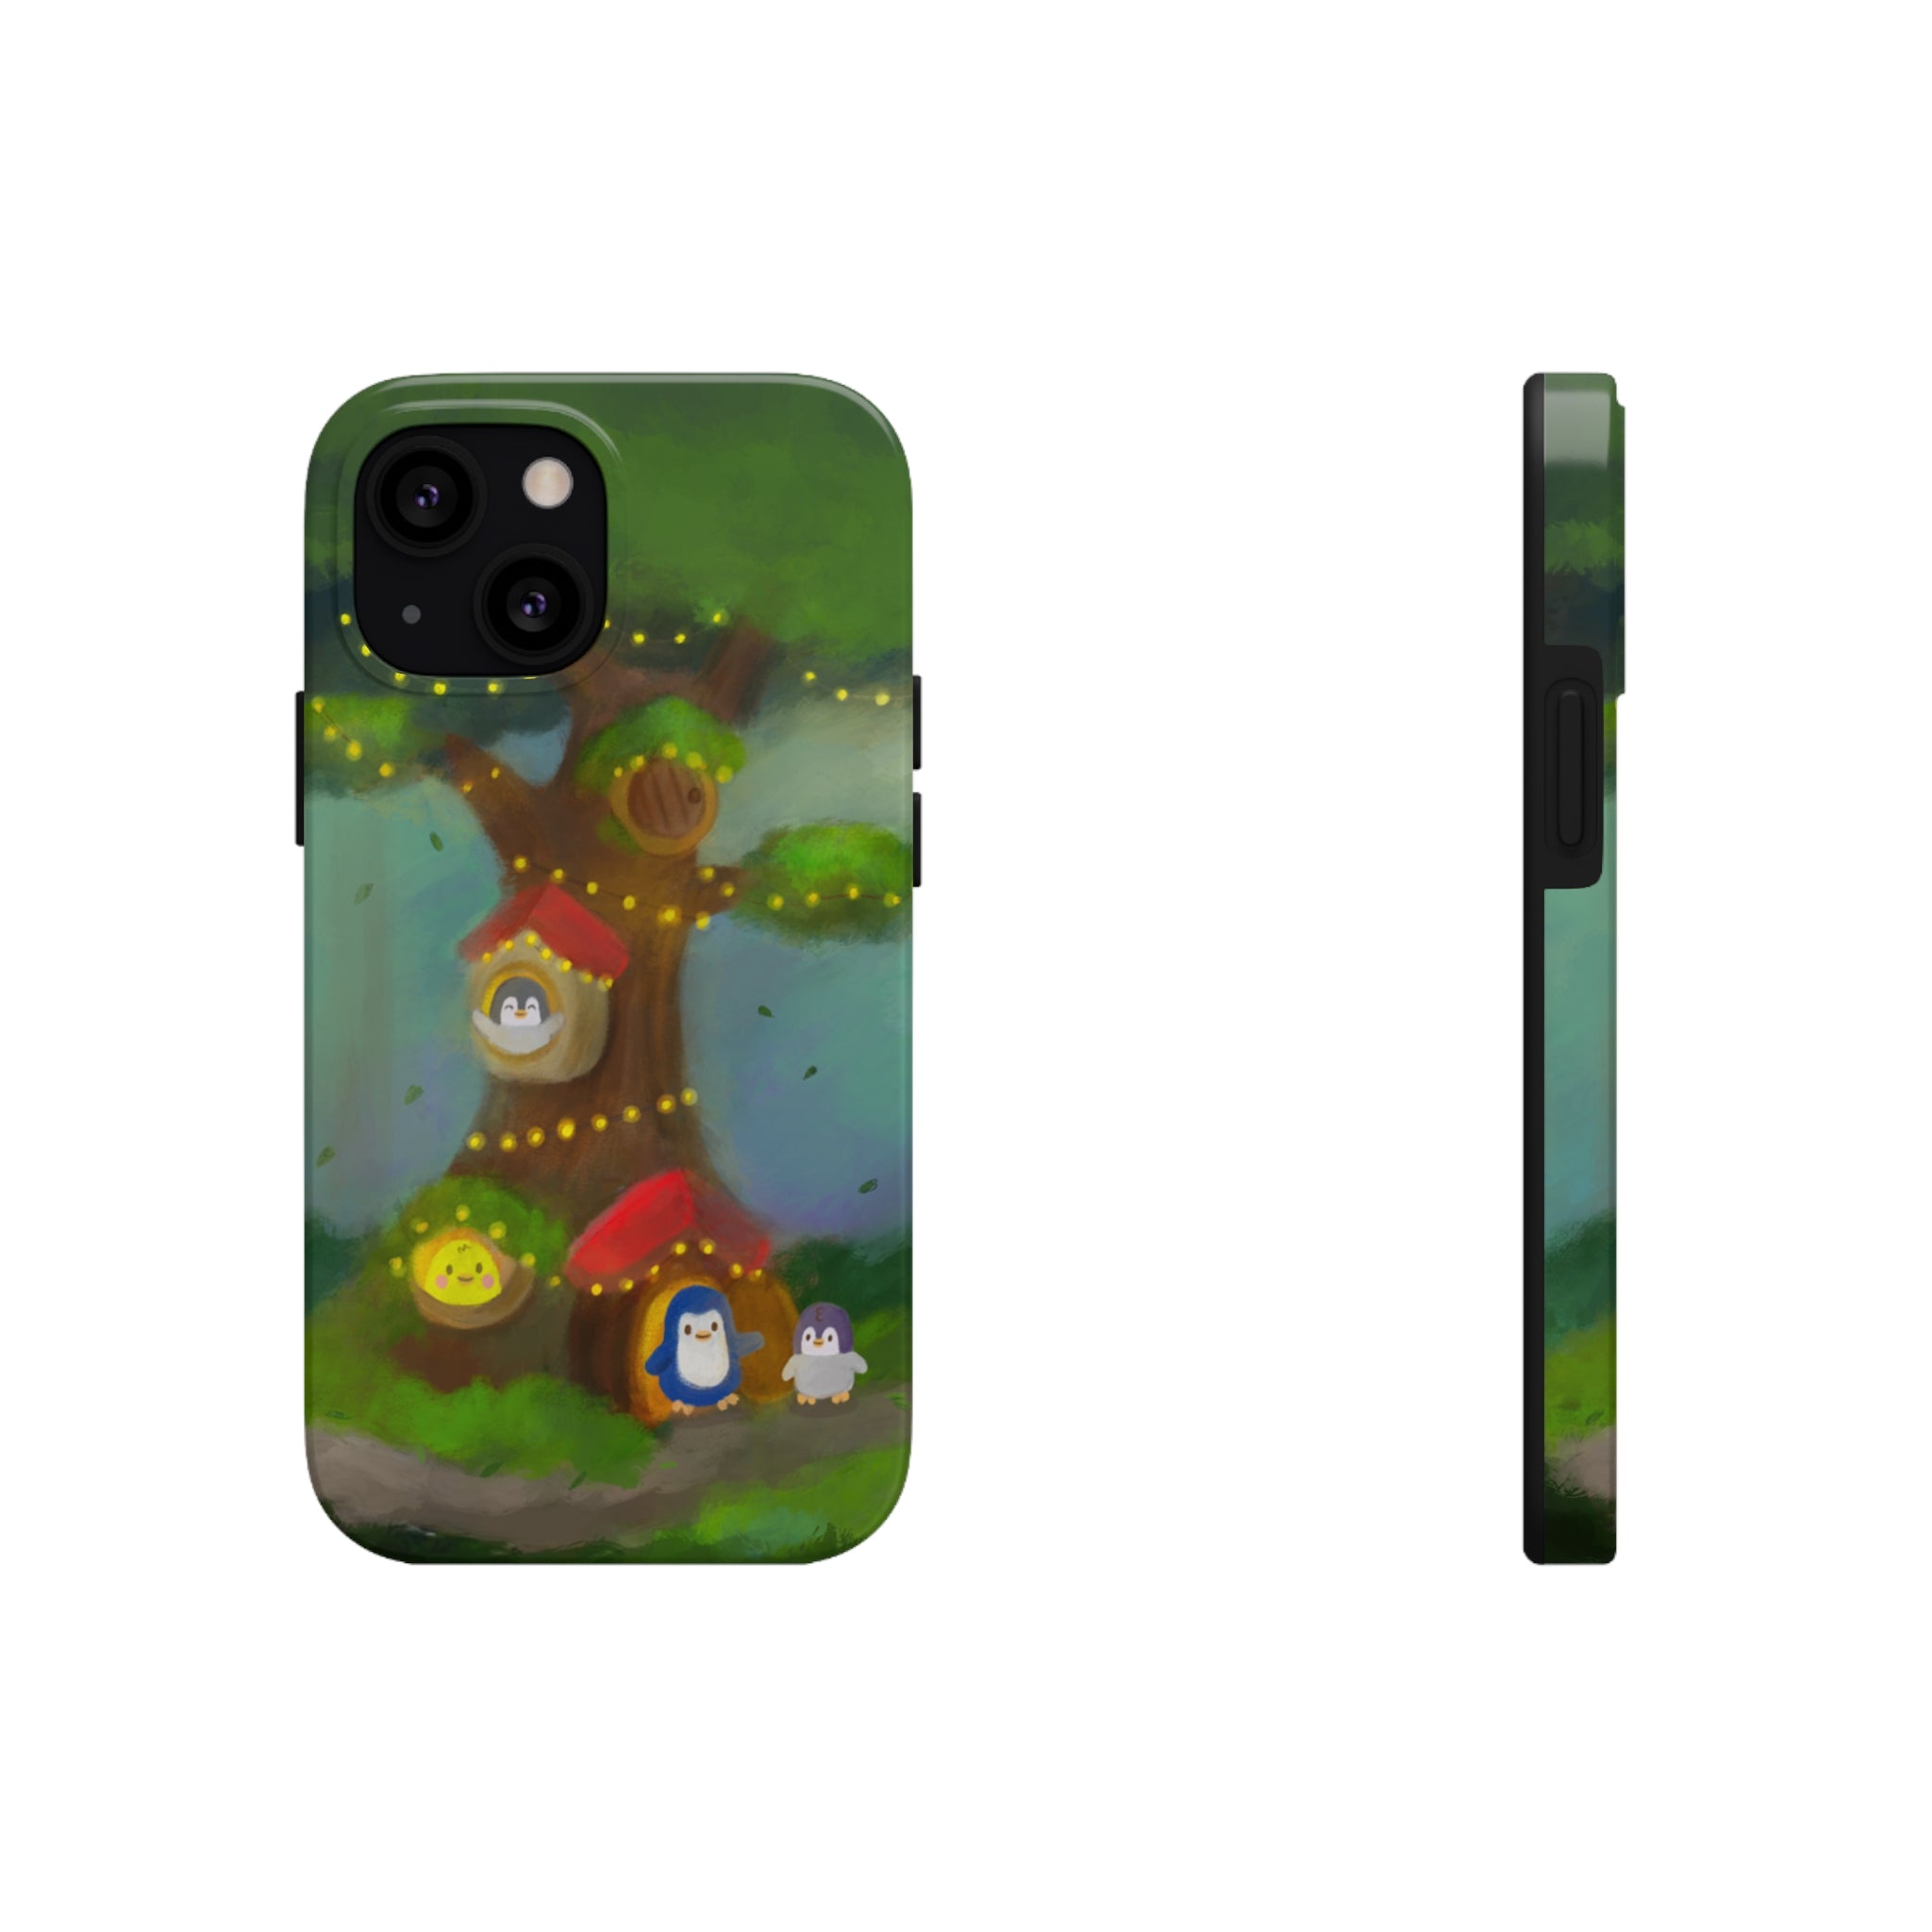 Our Home in the Forest iPhone Case